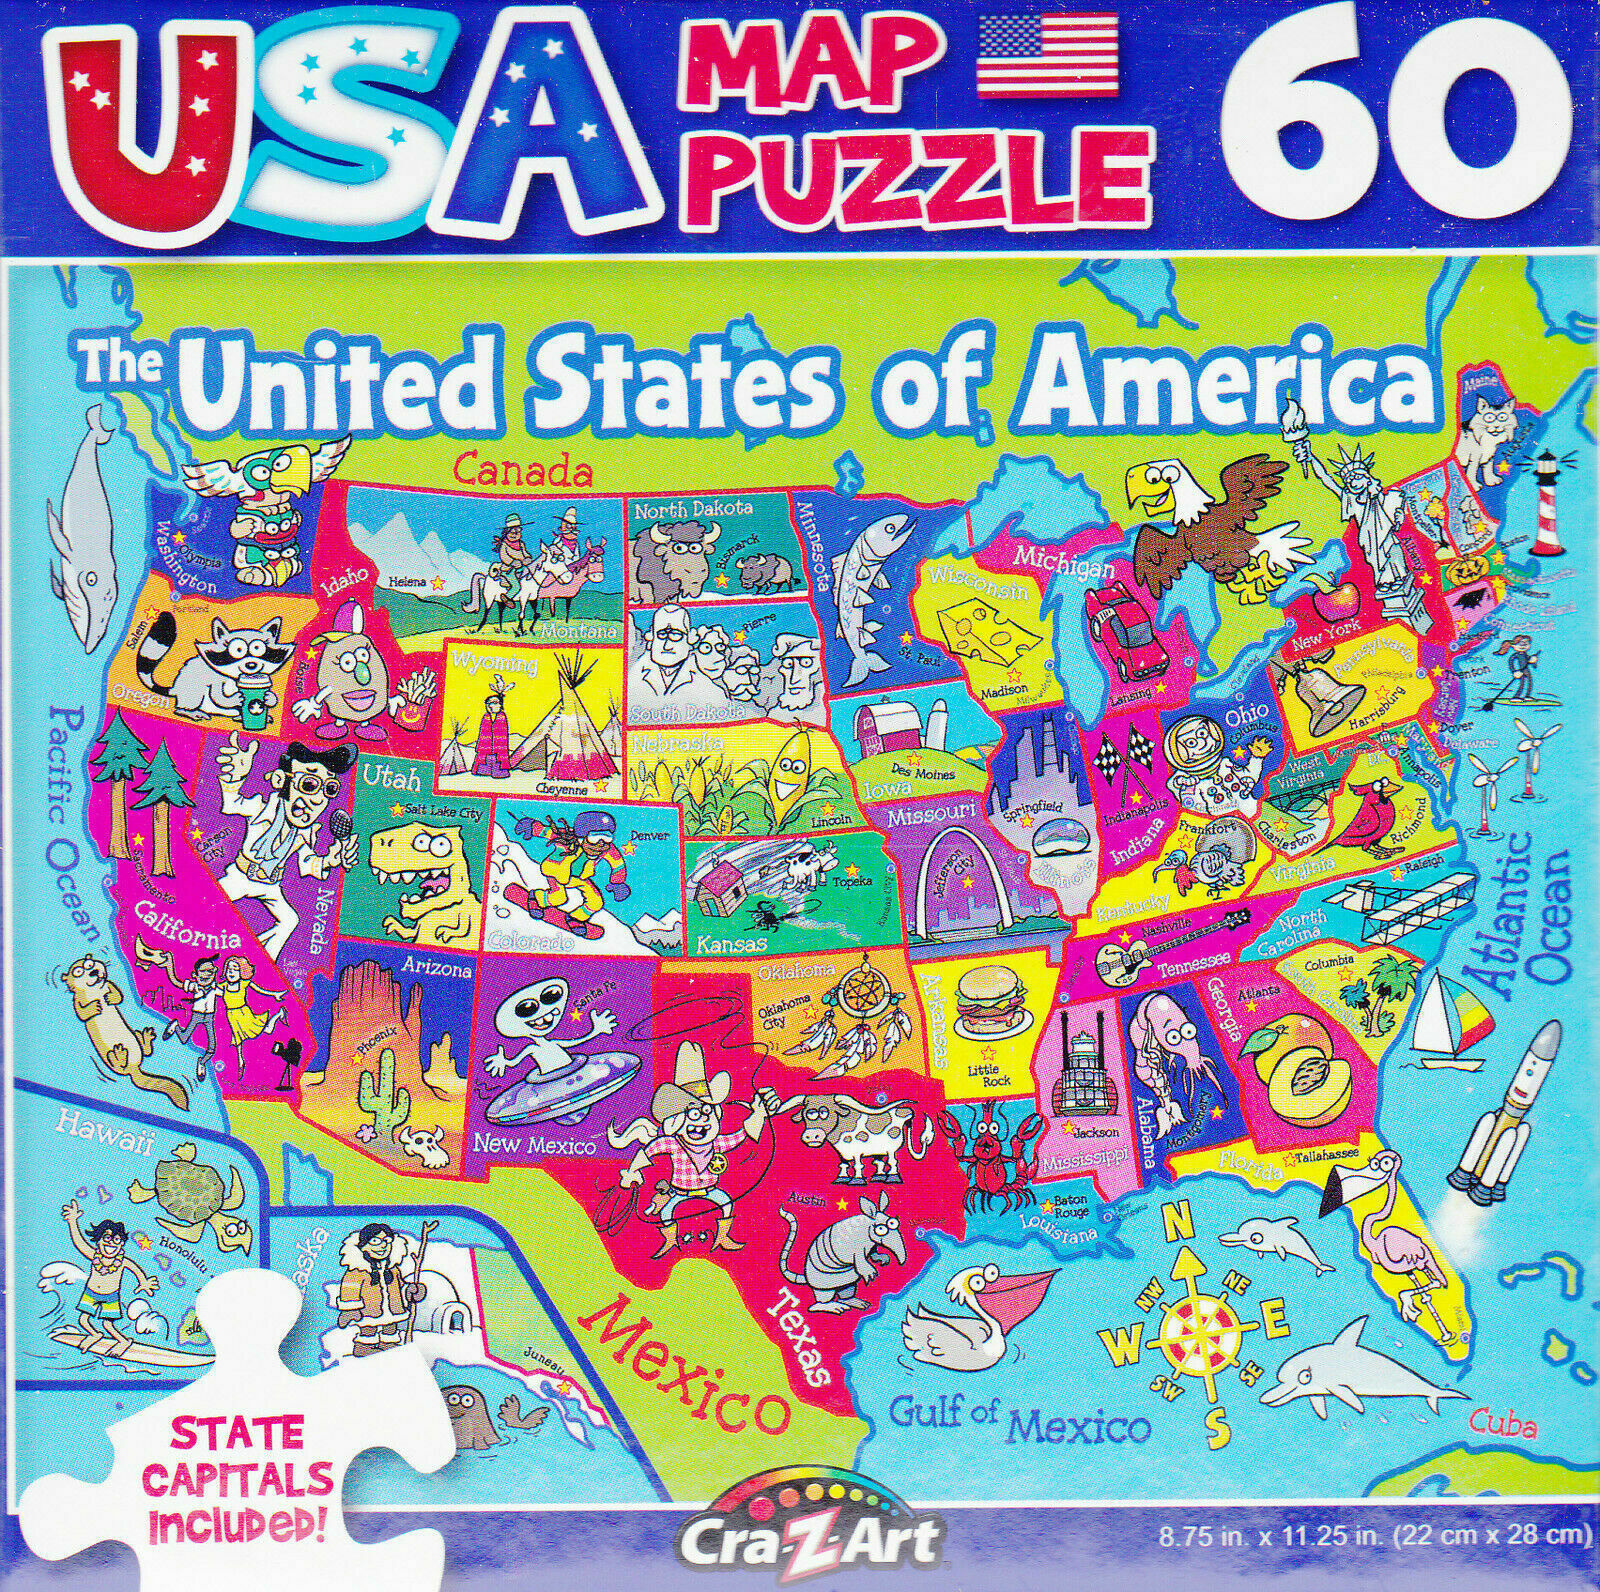 Jigsaw Puzzle USA MAP 50 United States of America 60 Pieces 8.75" x 11.